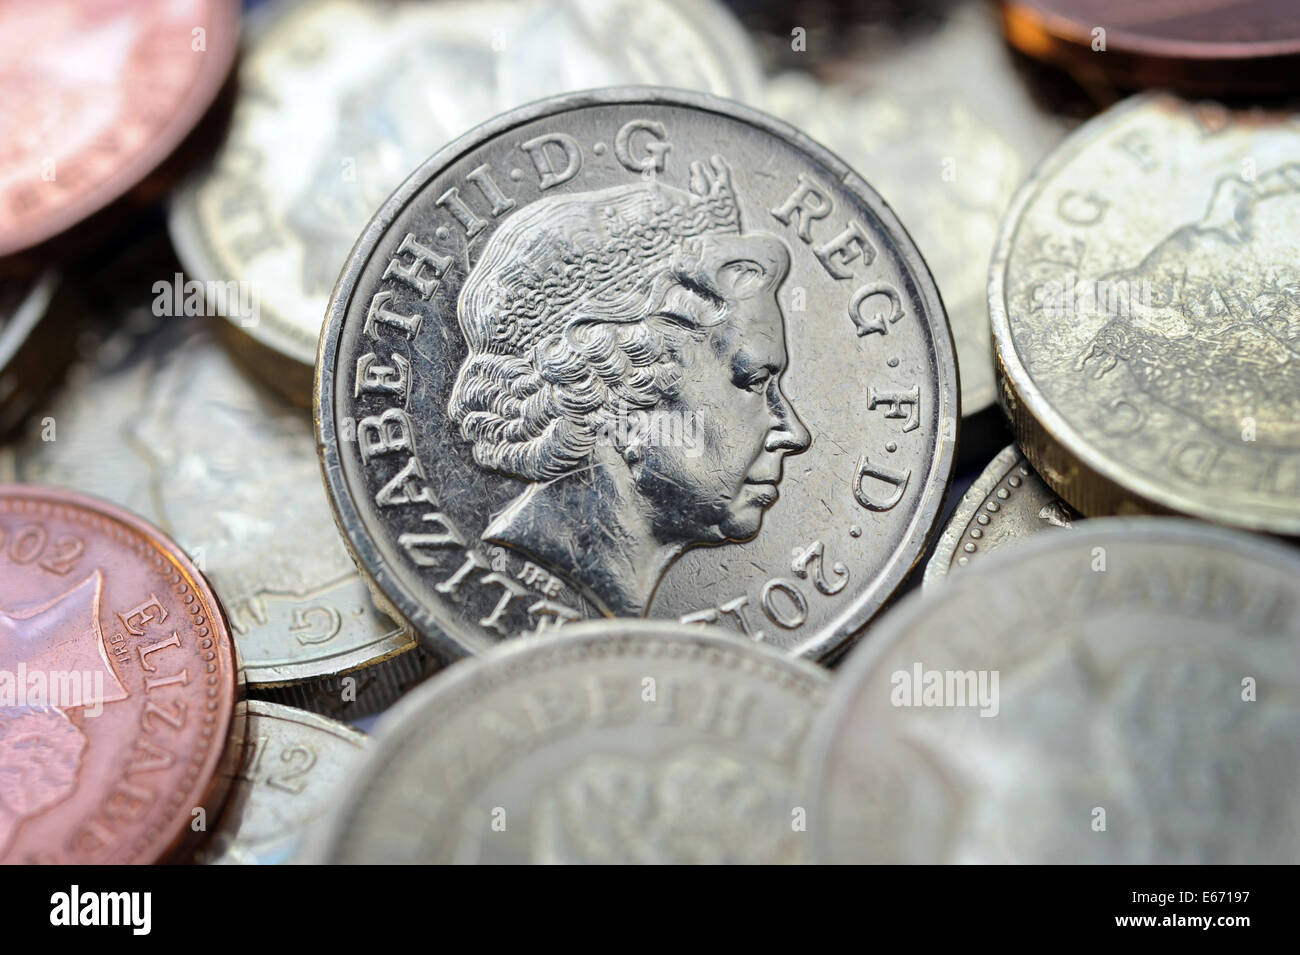 BRITISH ONE POUND COIN AMONGST OTHER COINS RE THE ECONOMY WAGES INCOMES SAVINGS MORTGAGES INTEREST RATES HOME BUYERS SAVERS UK Stock Photo